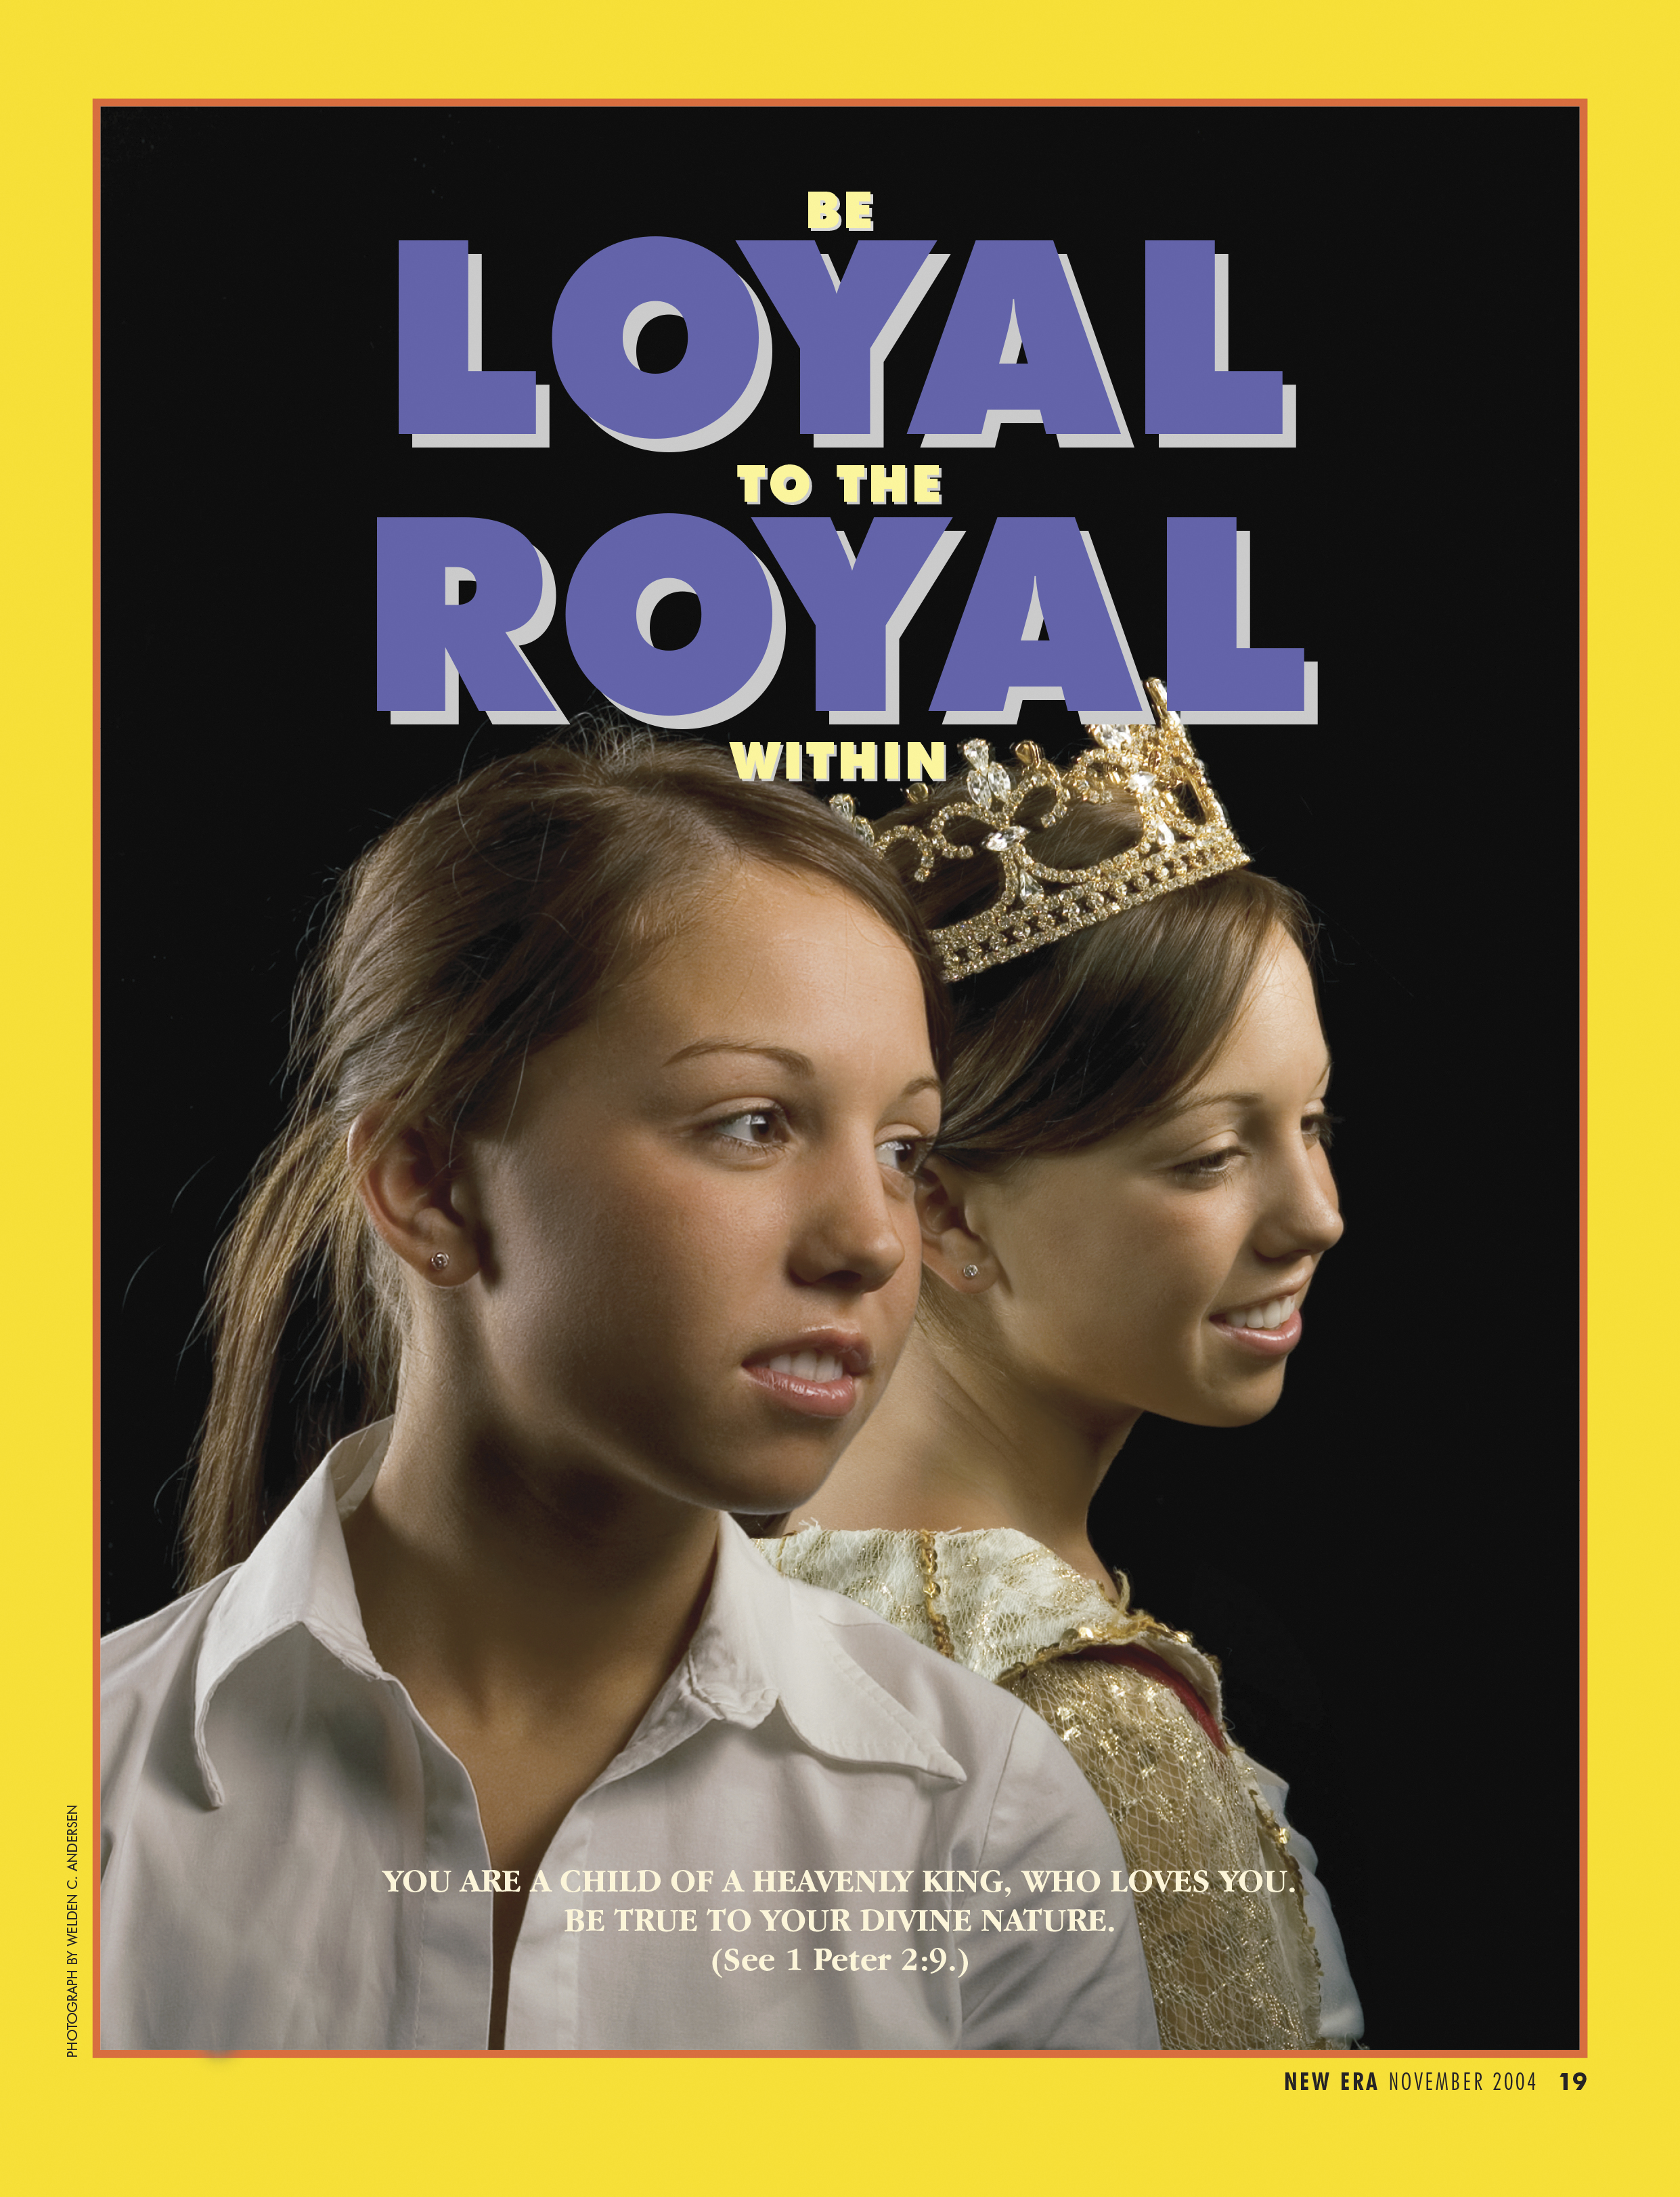 Be Loyal to the Royal Within. You are a child of a heavenly King, who loves you. Be true to your divine nature. (See 1 Peter 2:9.) Nov. 2004 © undefined ipCode 1.